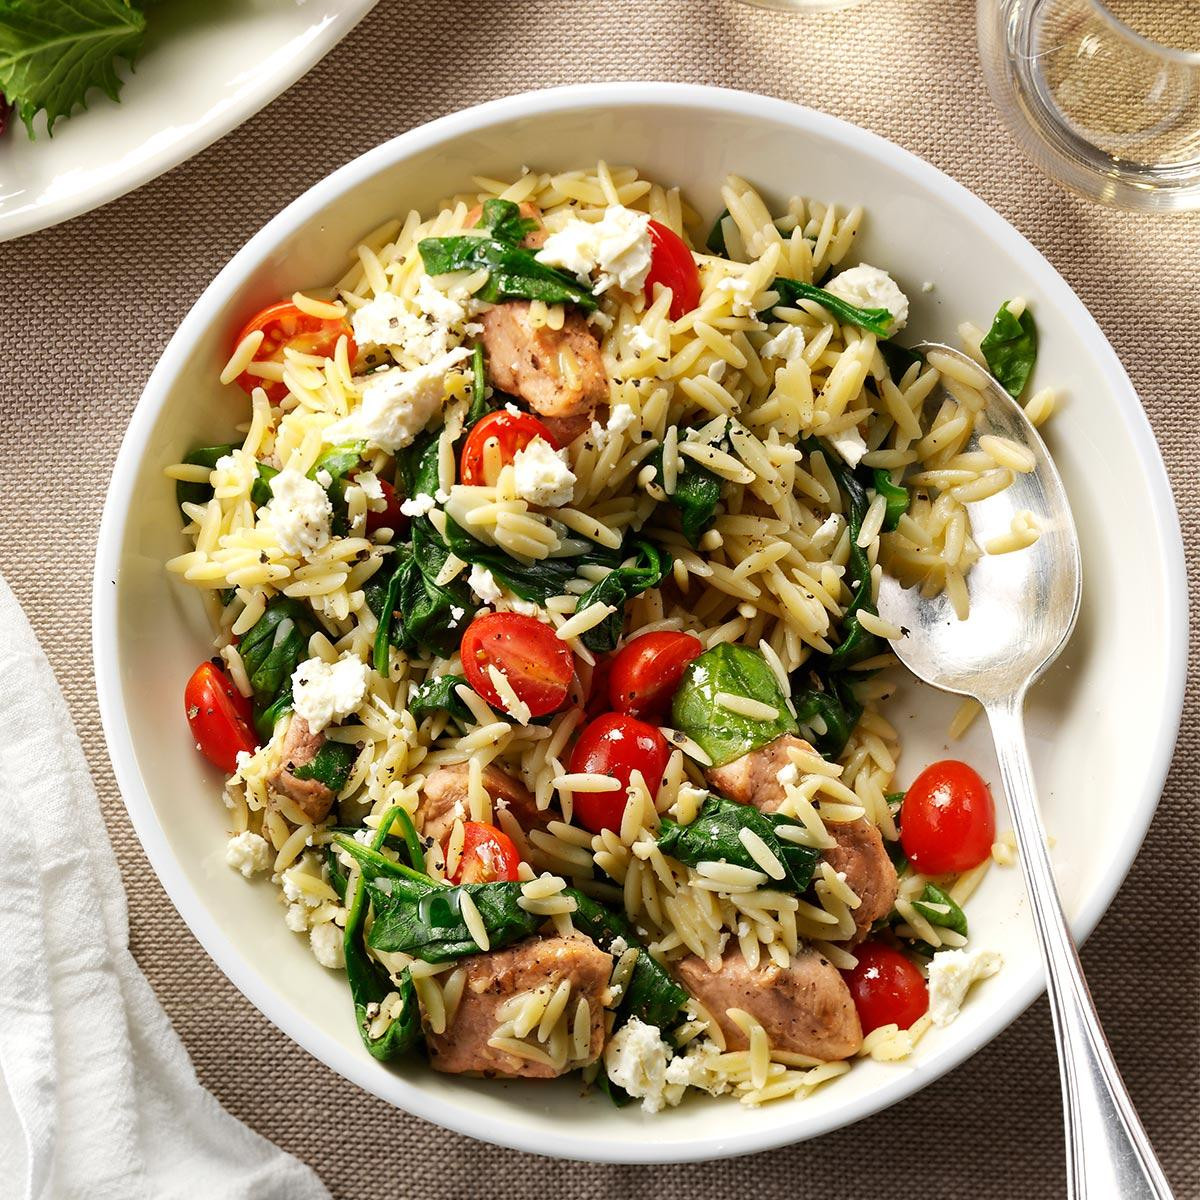 Healthy Meals For Dinner
 Mediterranean Pork and Orzo Recipe